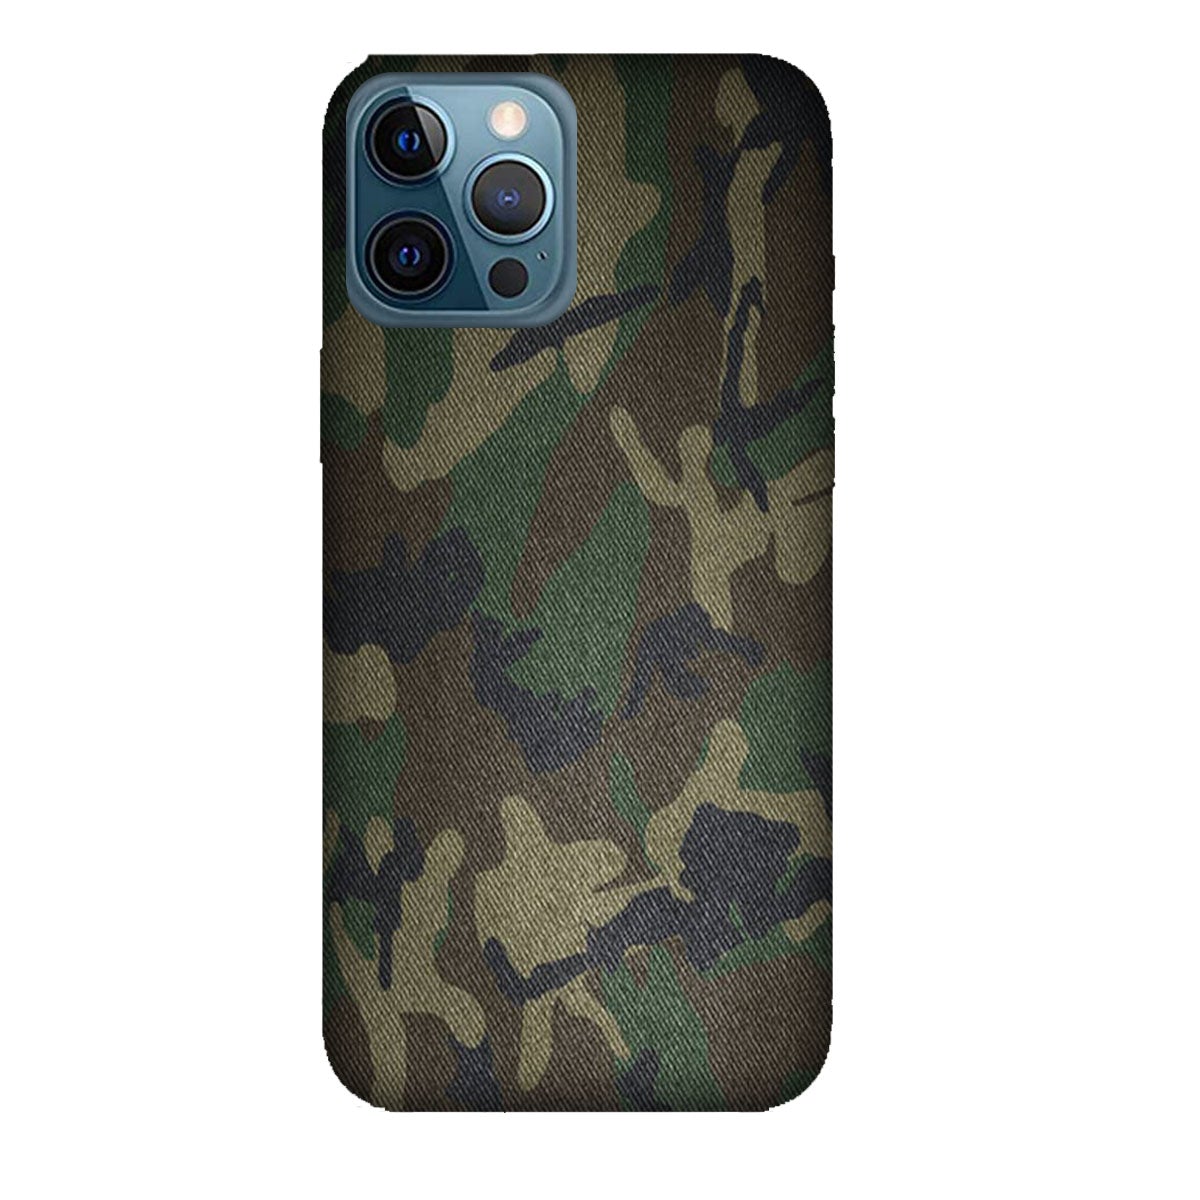 Camoflauge - Mobile Phone Cover - Hard Case